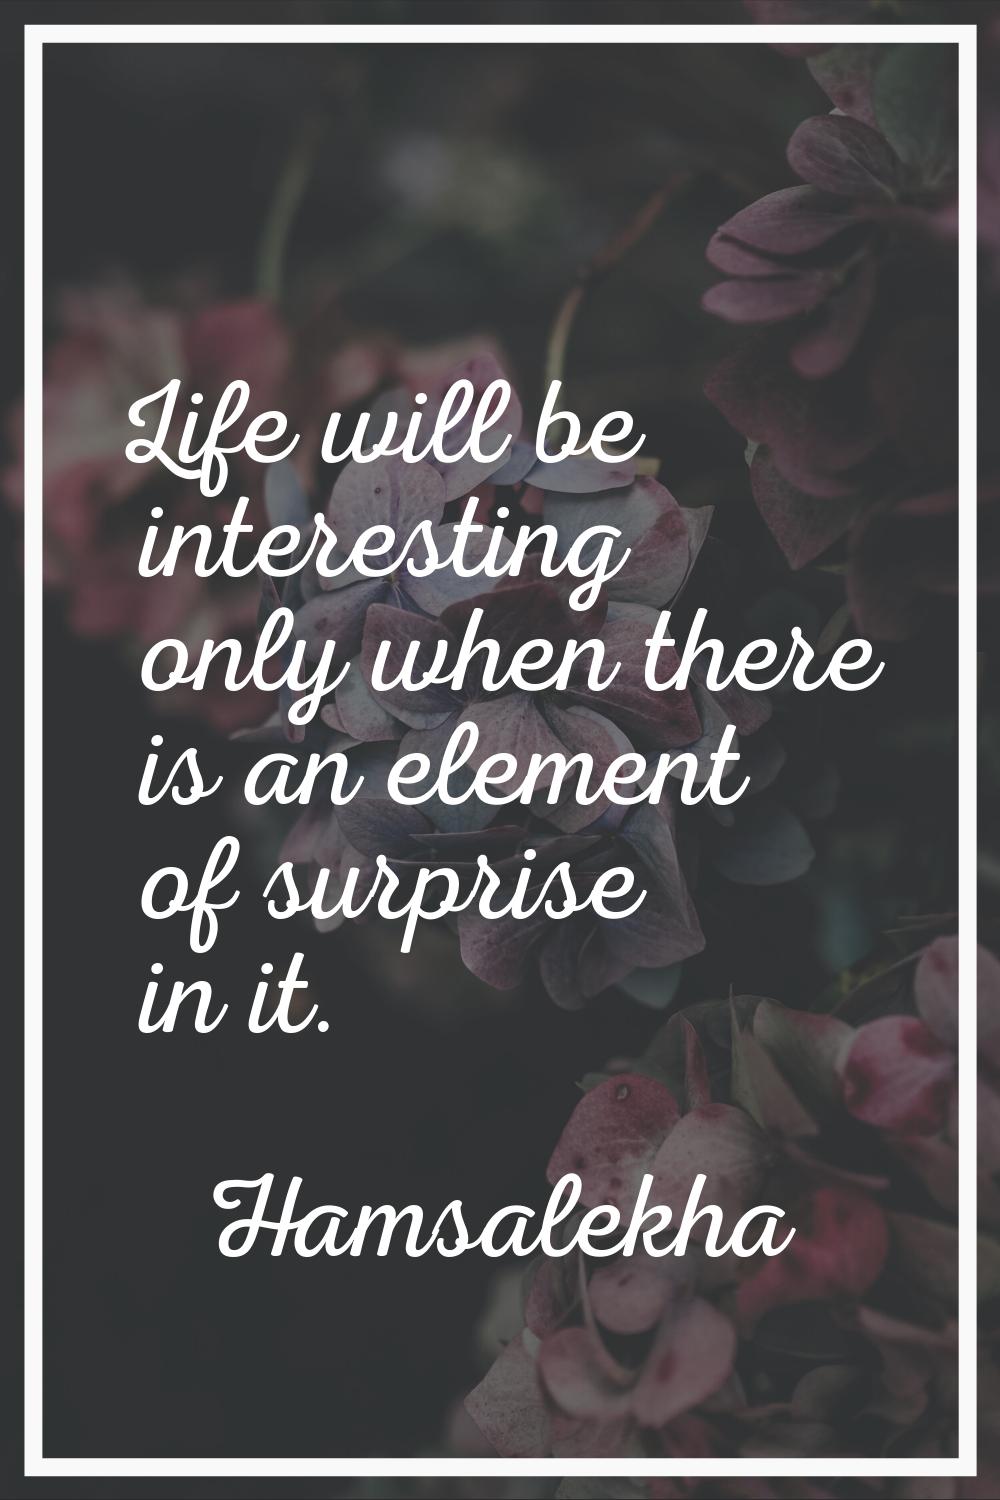 Life will be interesting only when there is an element of surprise in it.